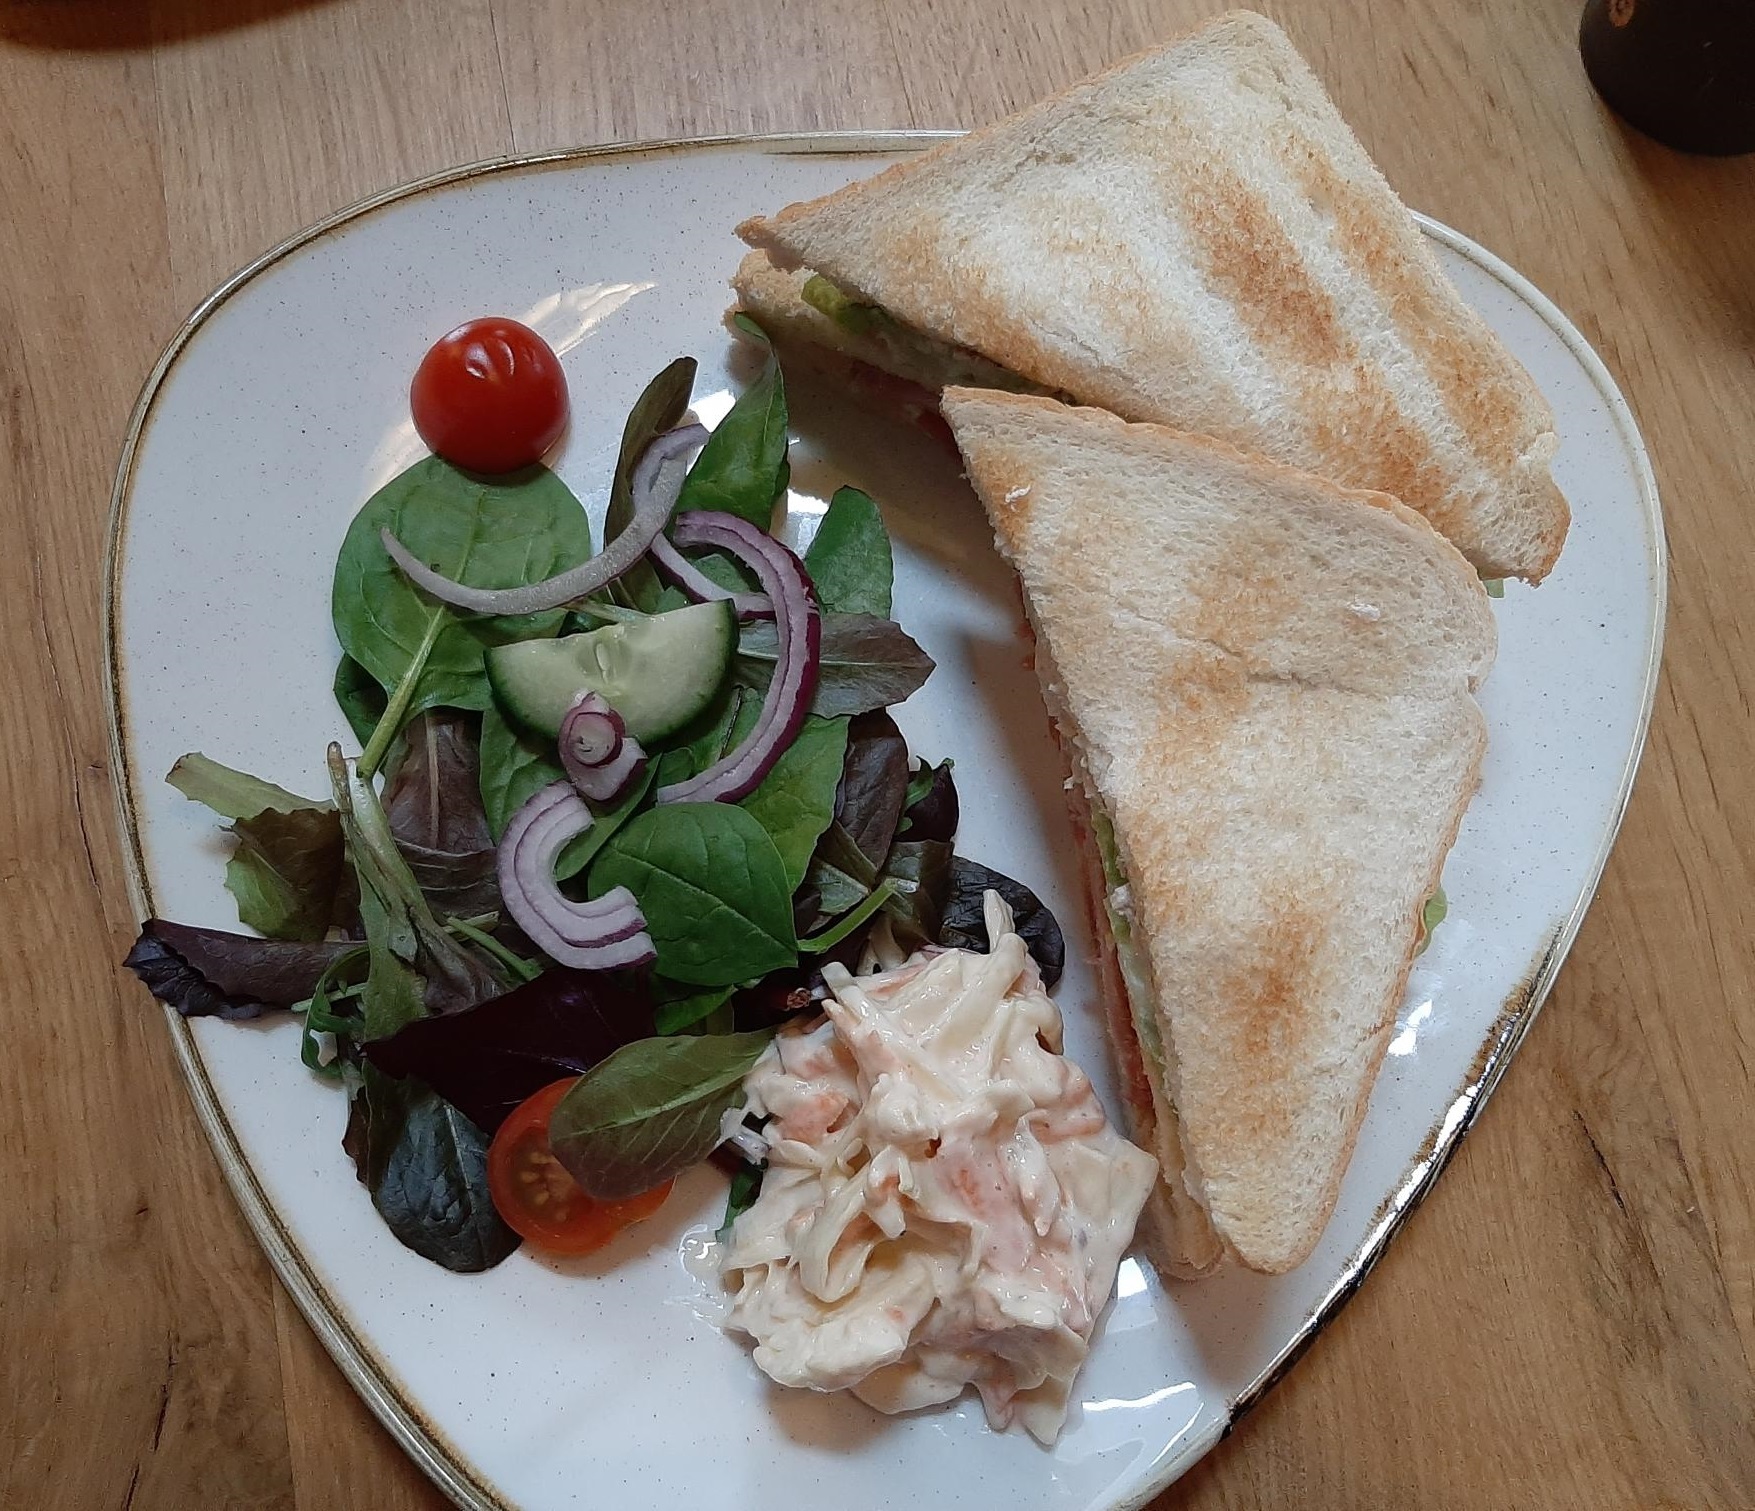 The club sandwich with salad at Thimbleby Shooting Ground cafe